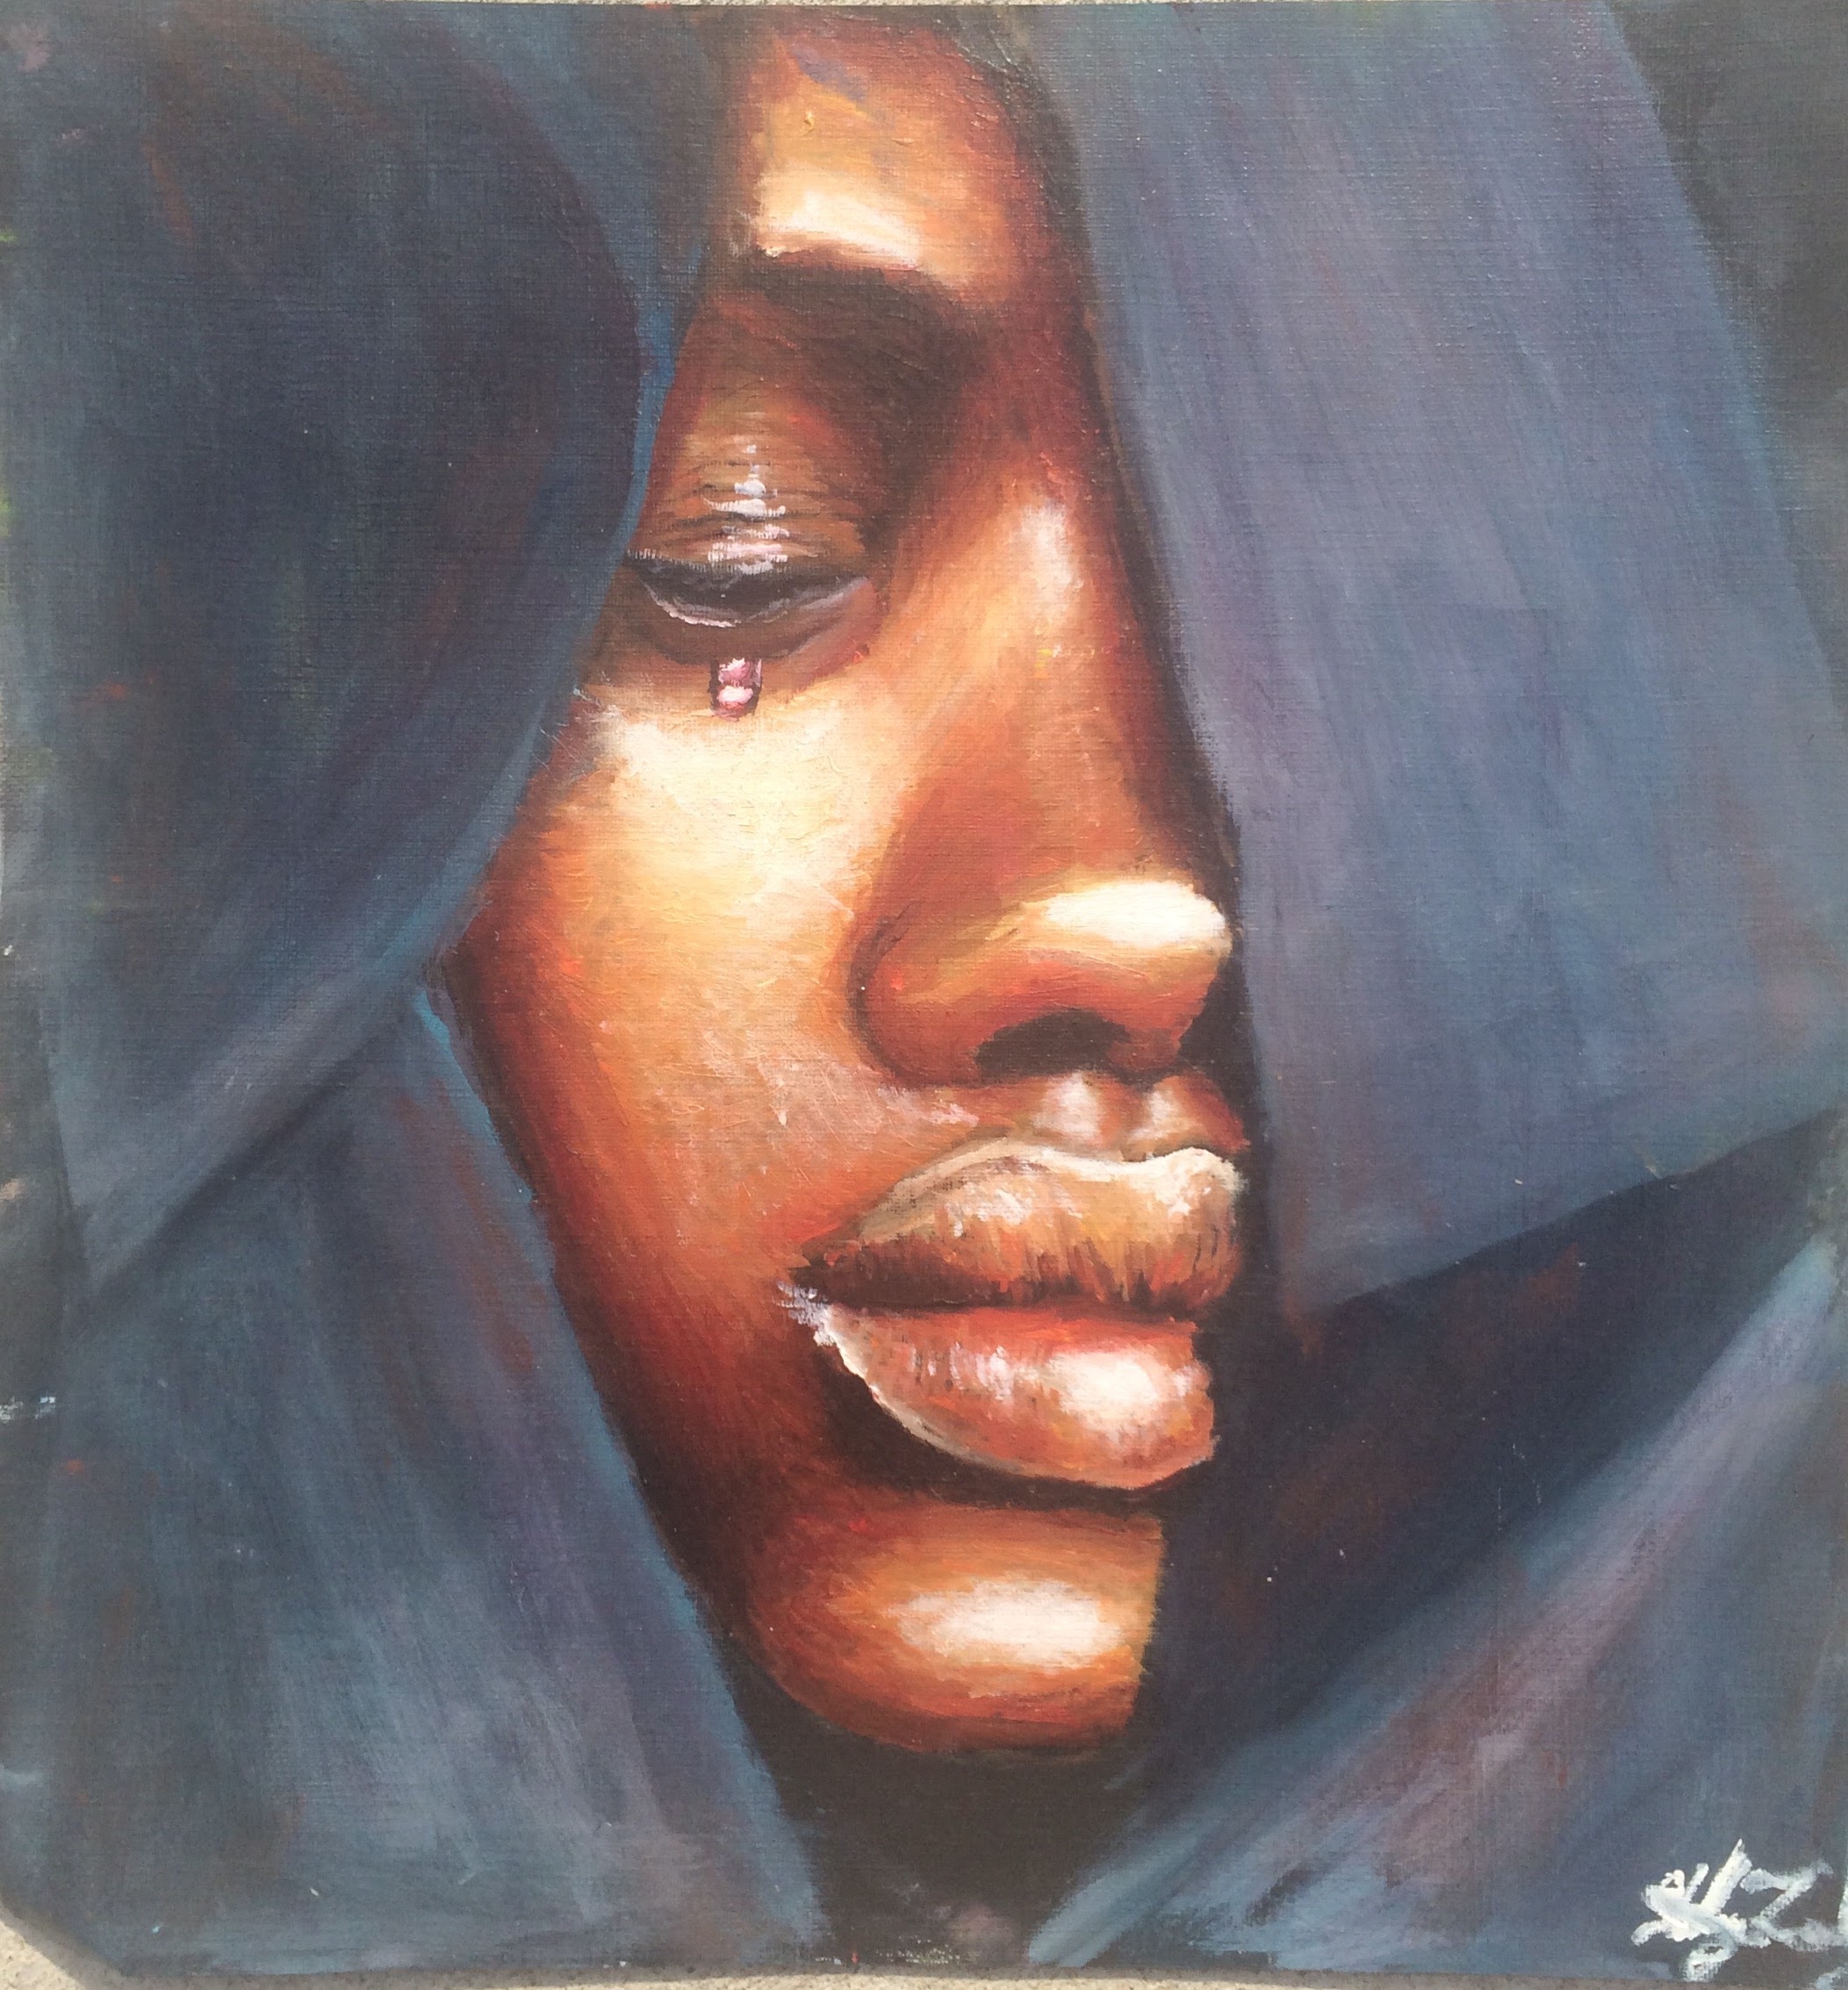 Oil painting of a crying face